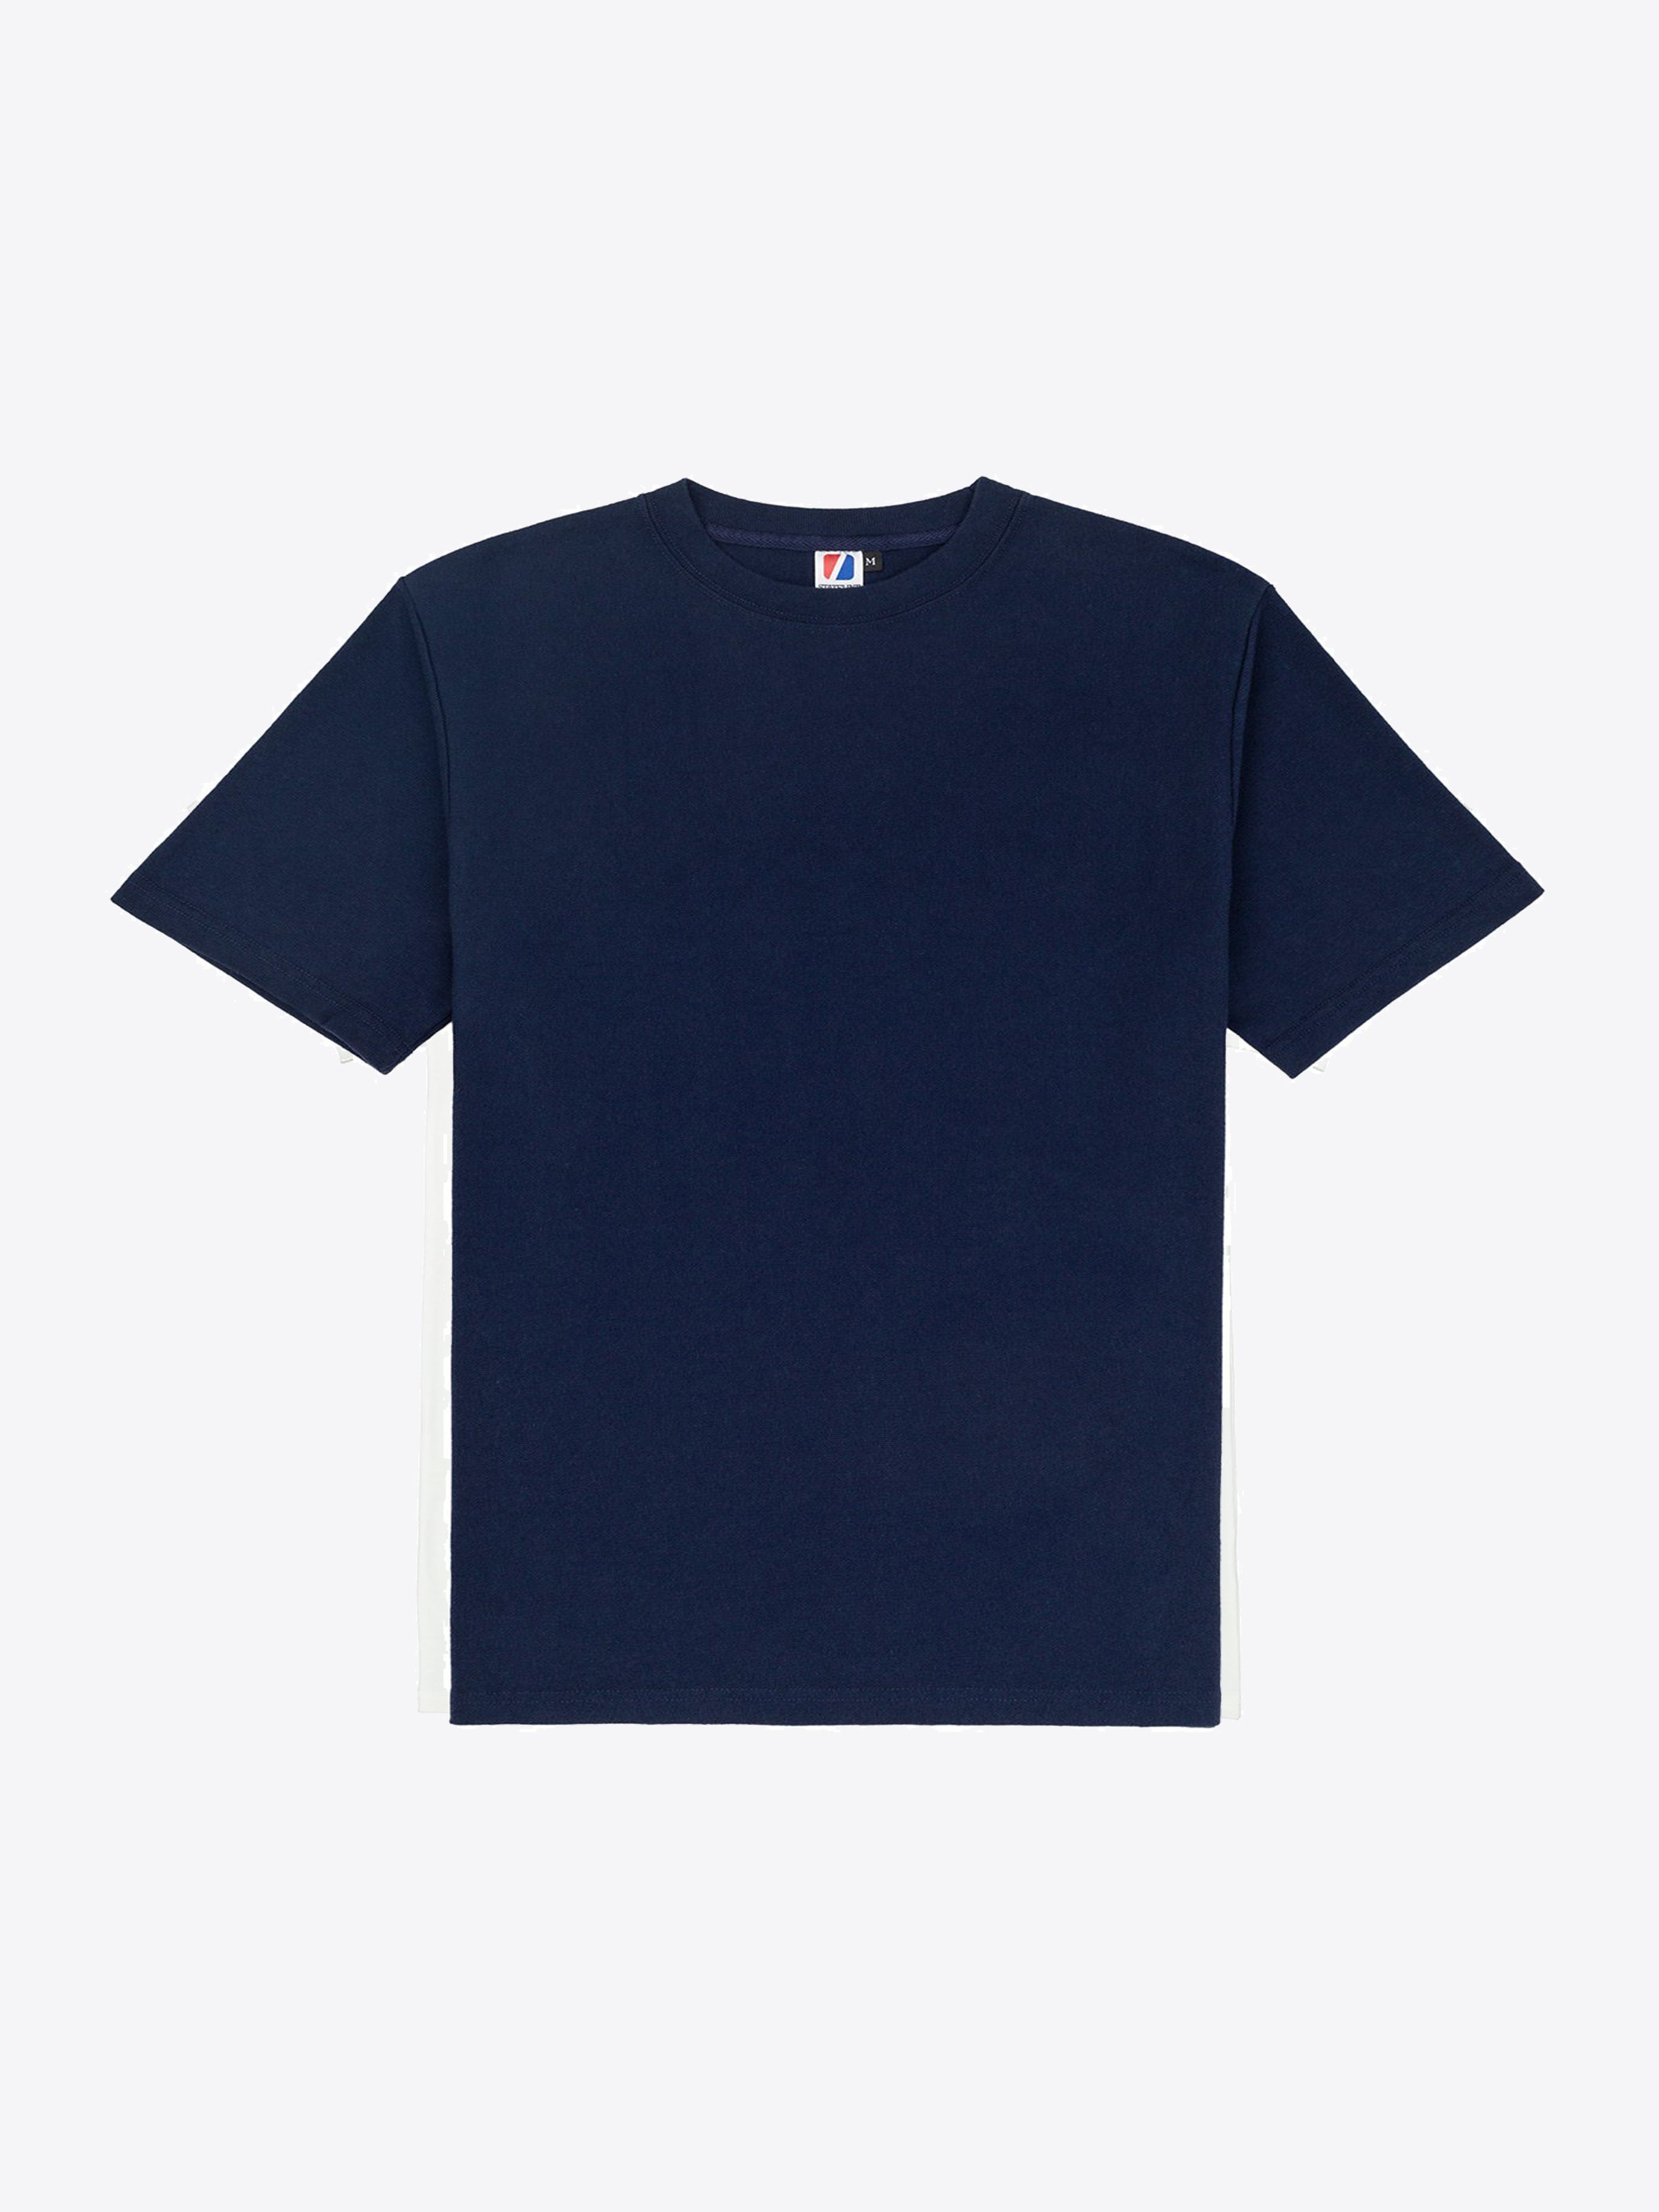 Rugby S/S Tee - Navy